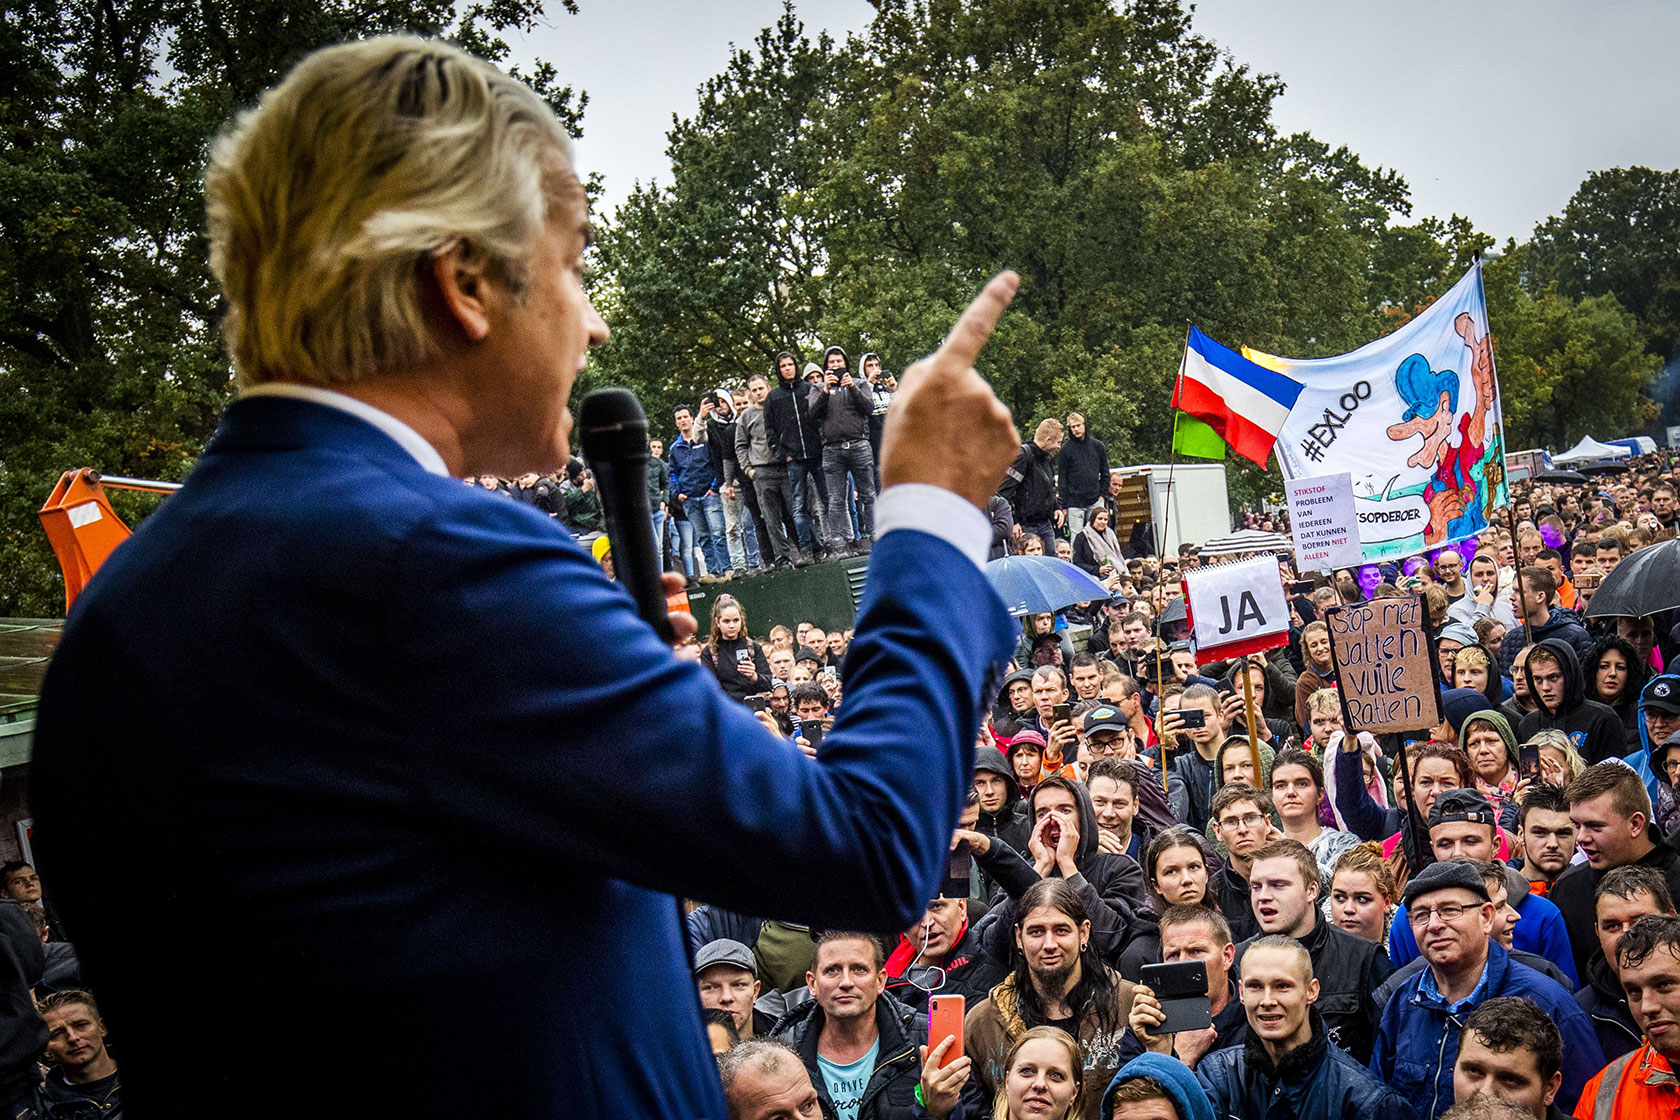 Photo shows the back of Geert Wilders wearing a blue suit in the foreground, slightly blurry, and a large crowd facing him as he speaks, with trees in the background